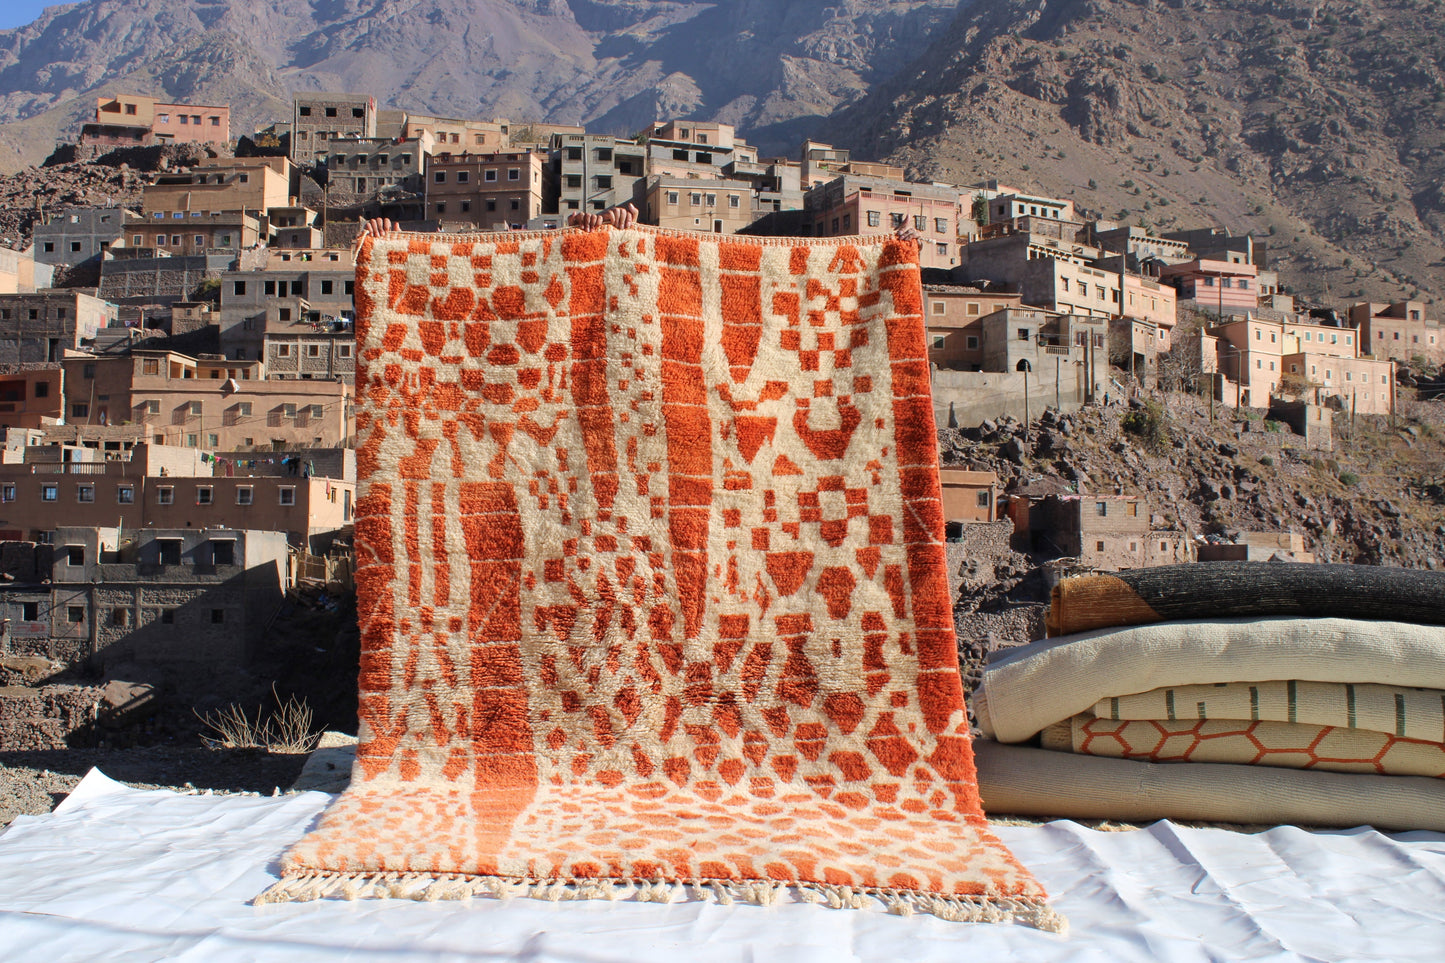 Beni Ourain rugs originate from the Atlas Mountains of Morocco and are characterized by their distinctive, neutral-toned, and geometric designs. These handwoven rugs often feature a plush pile and are made by the Berber tribes,  size is 270x180 cm